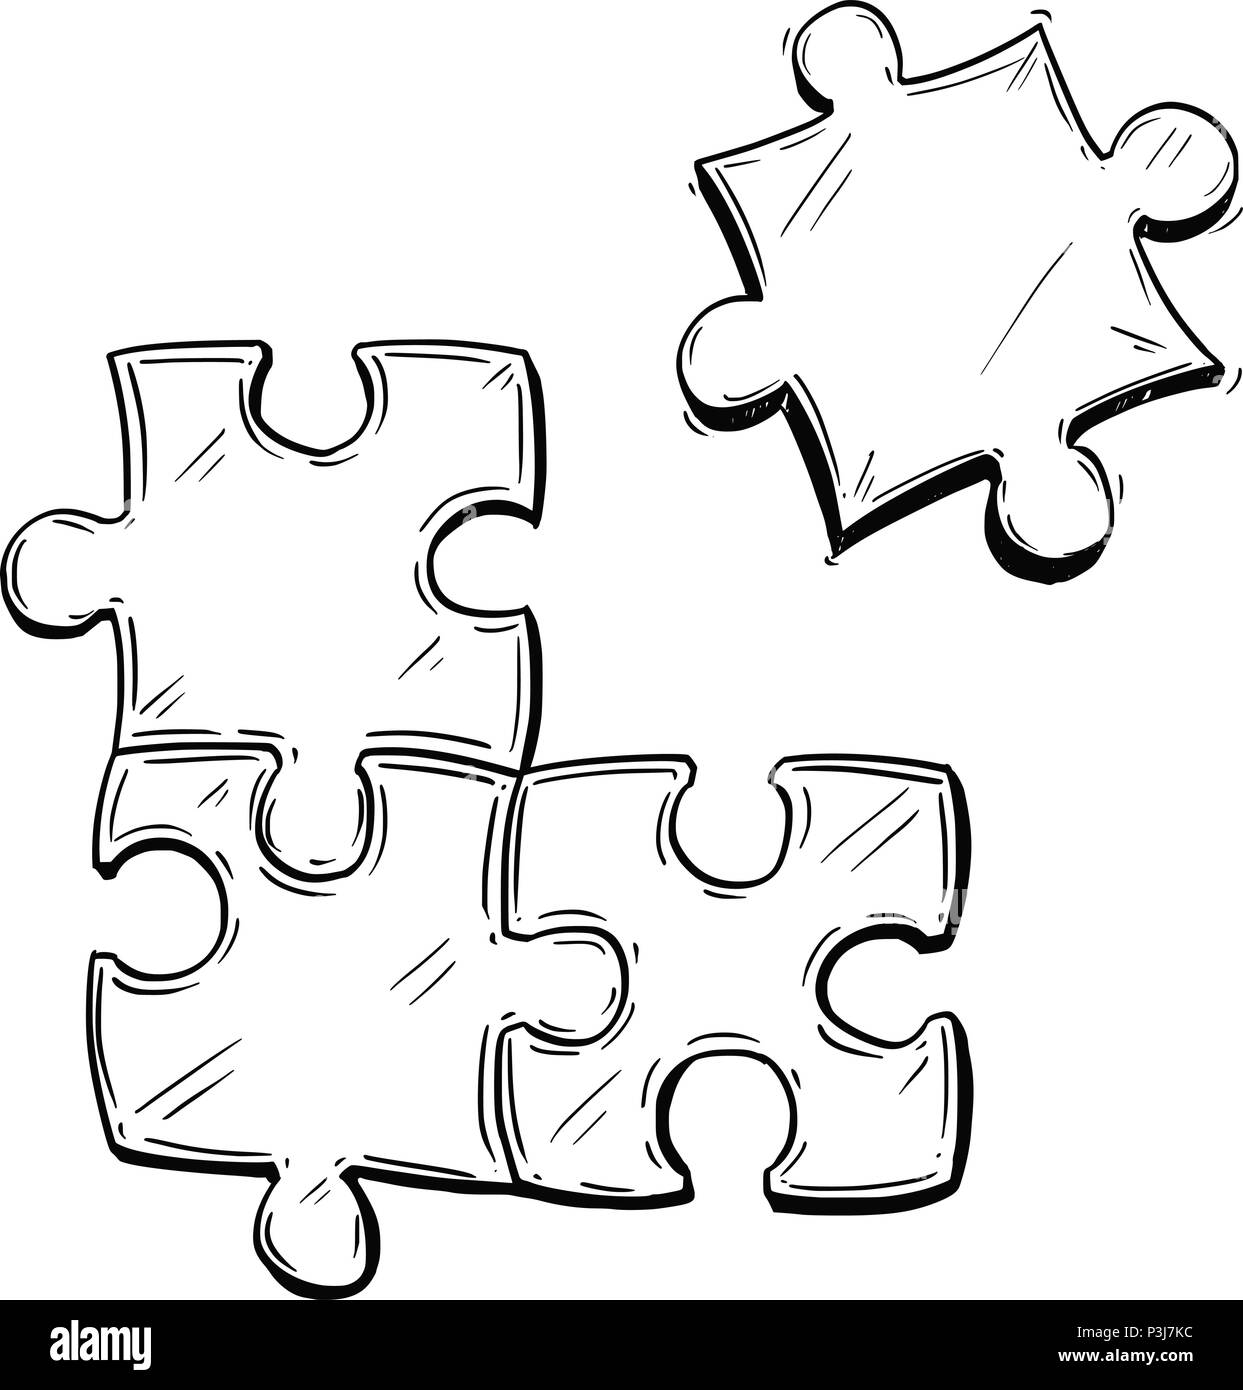 puzzle pieces drawing